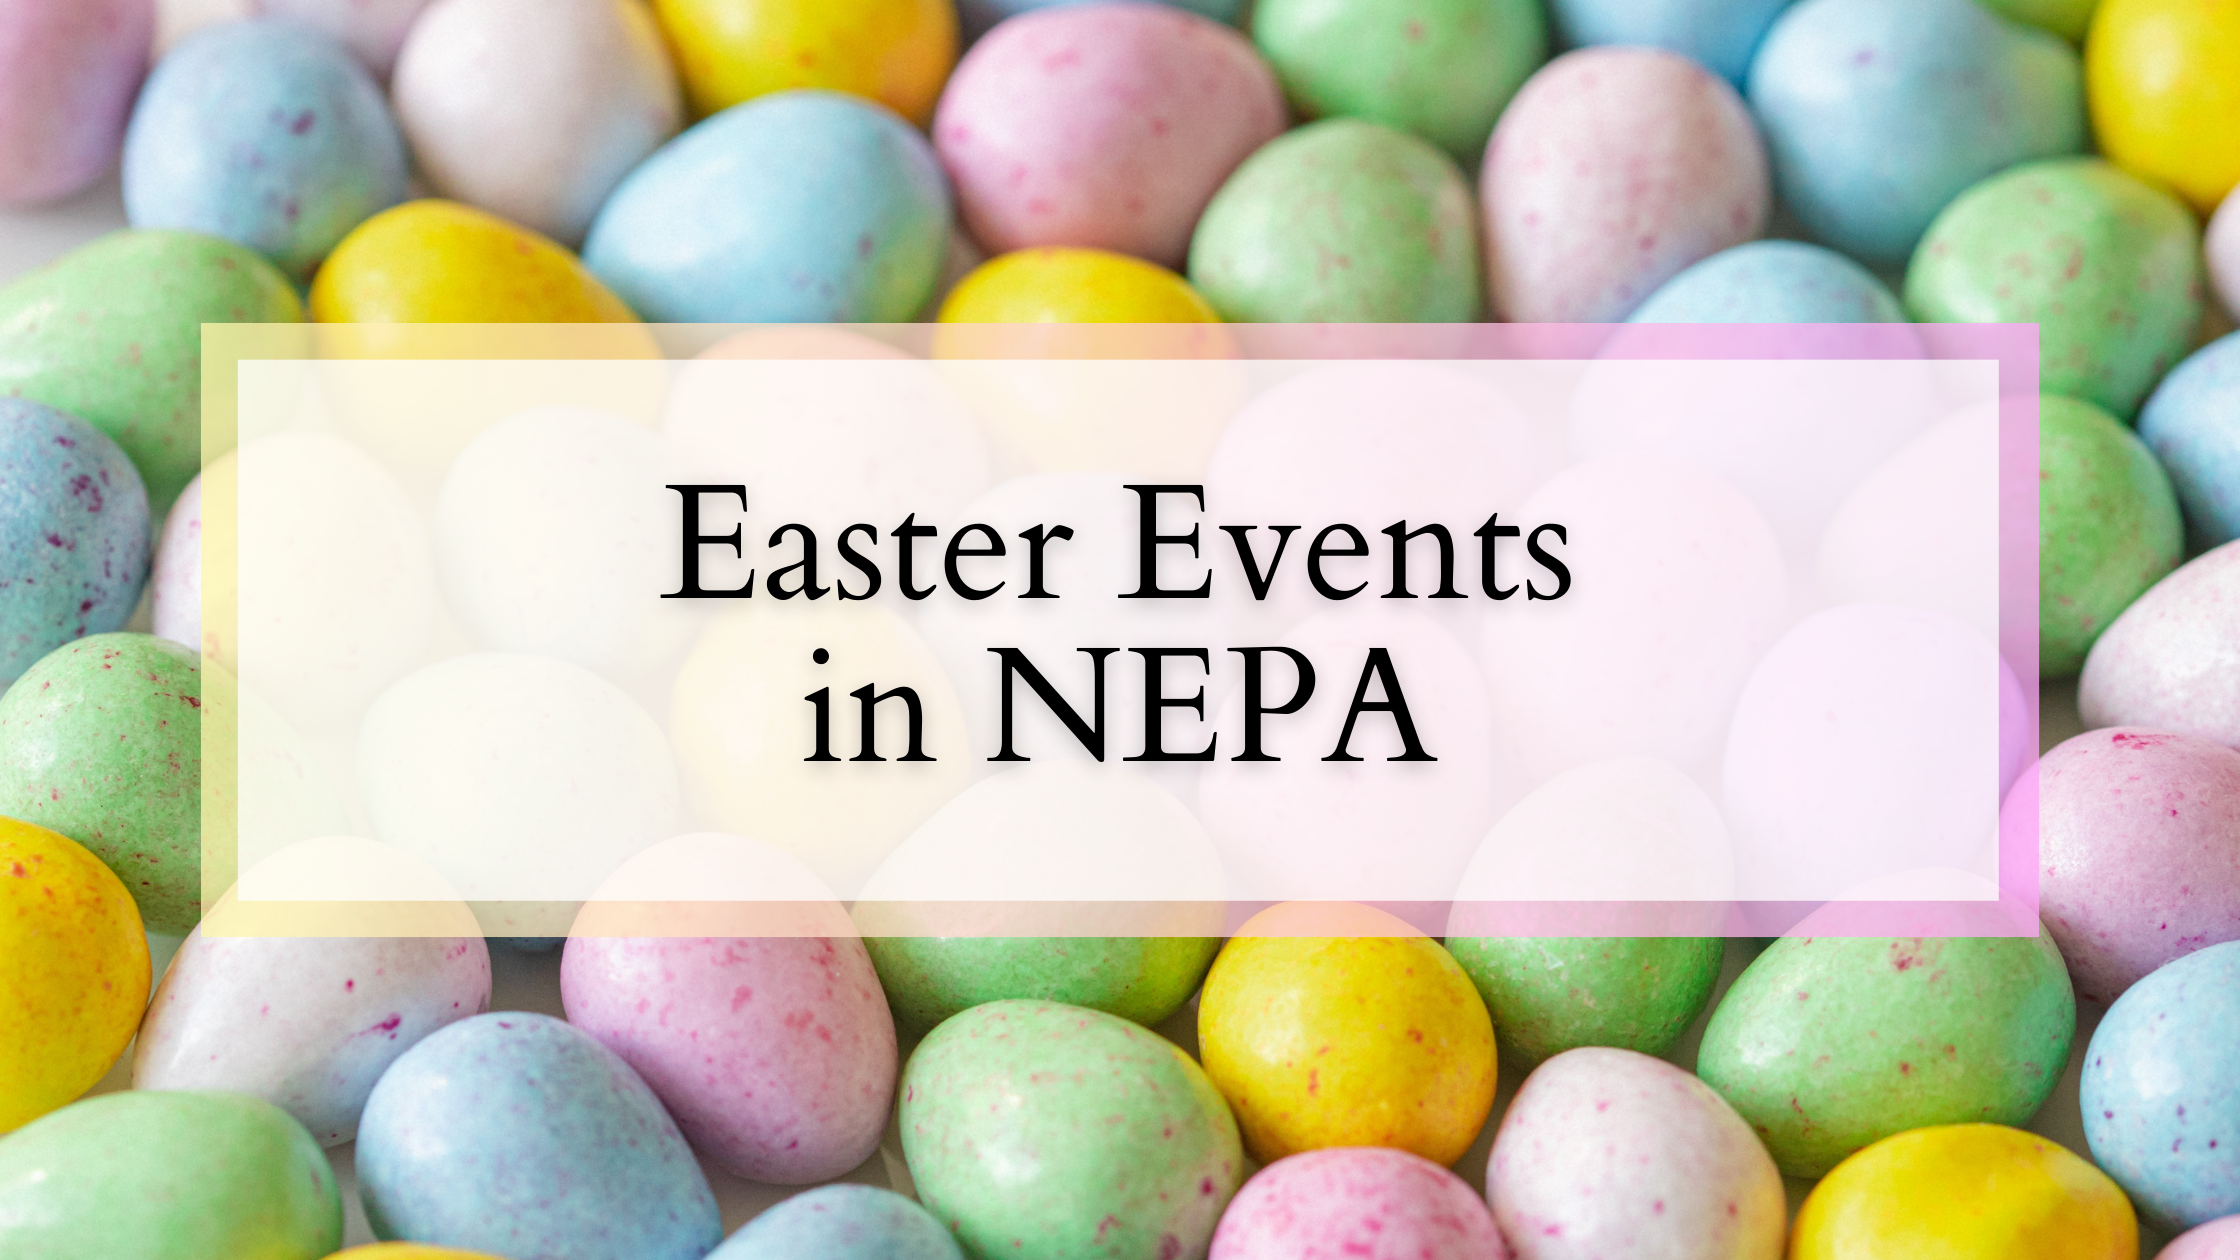 Easter Events in NEPA